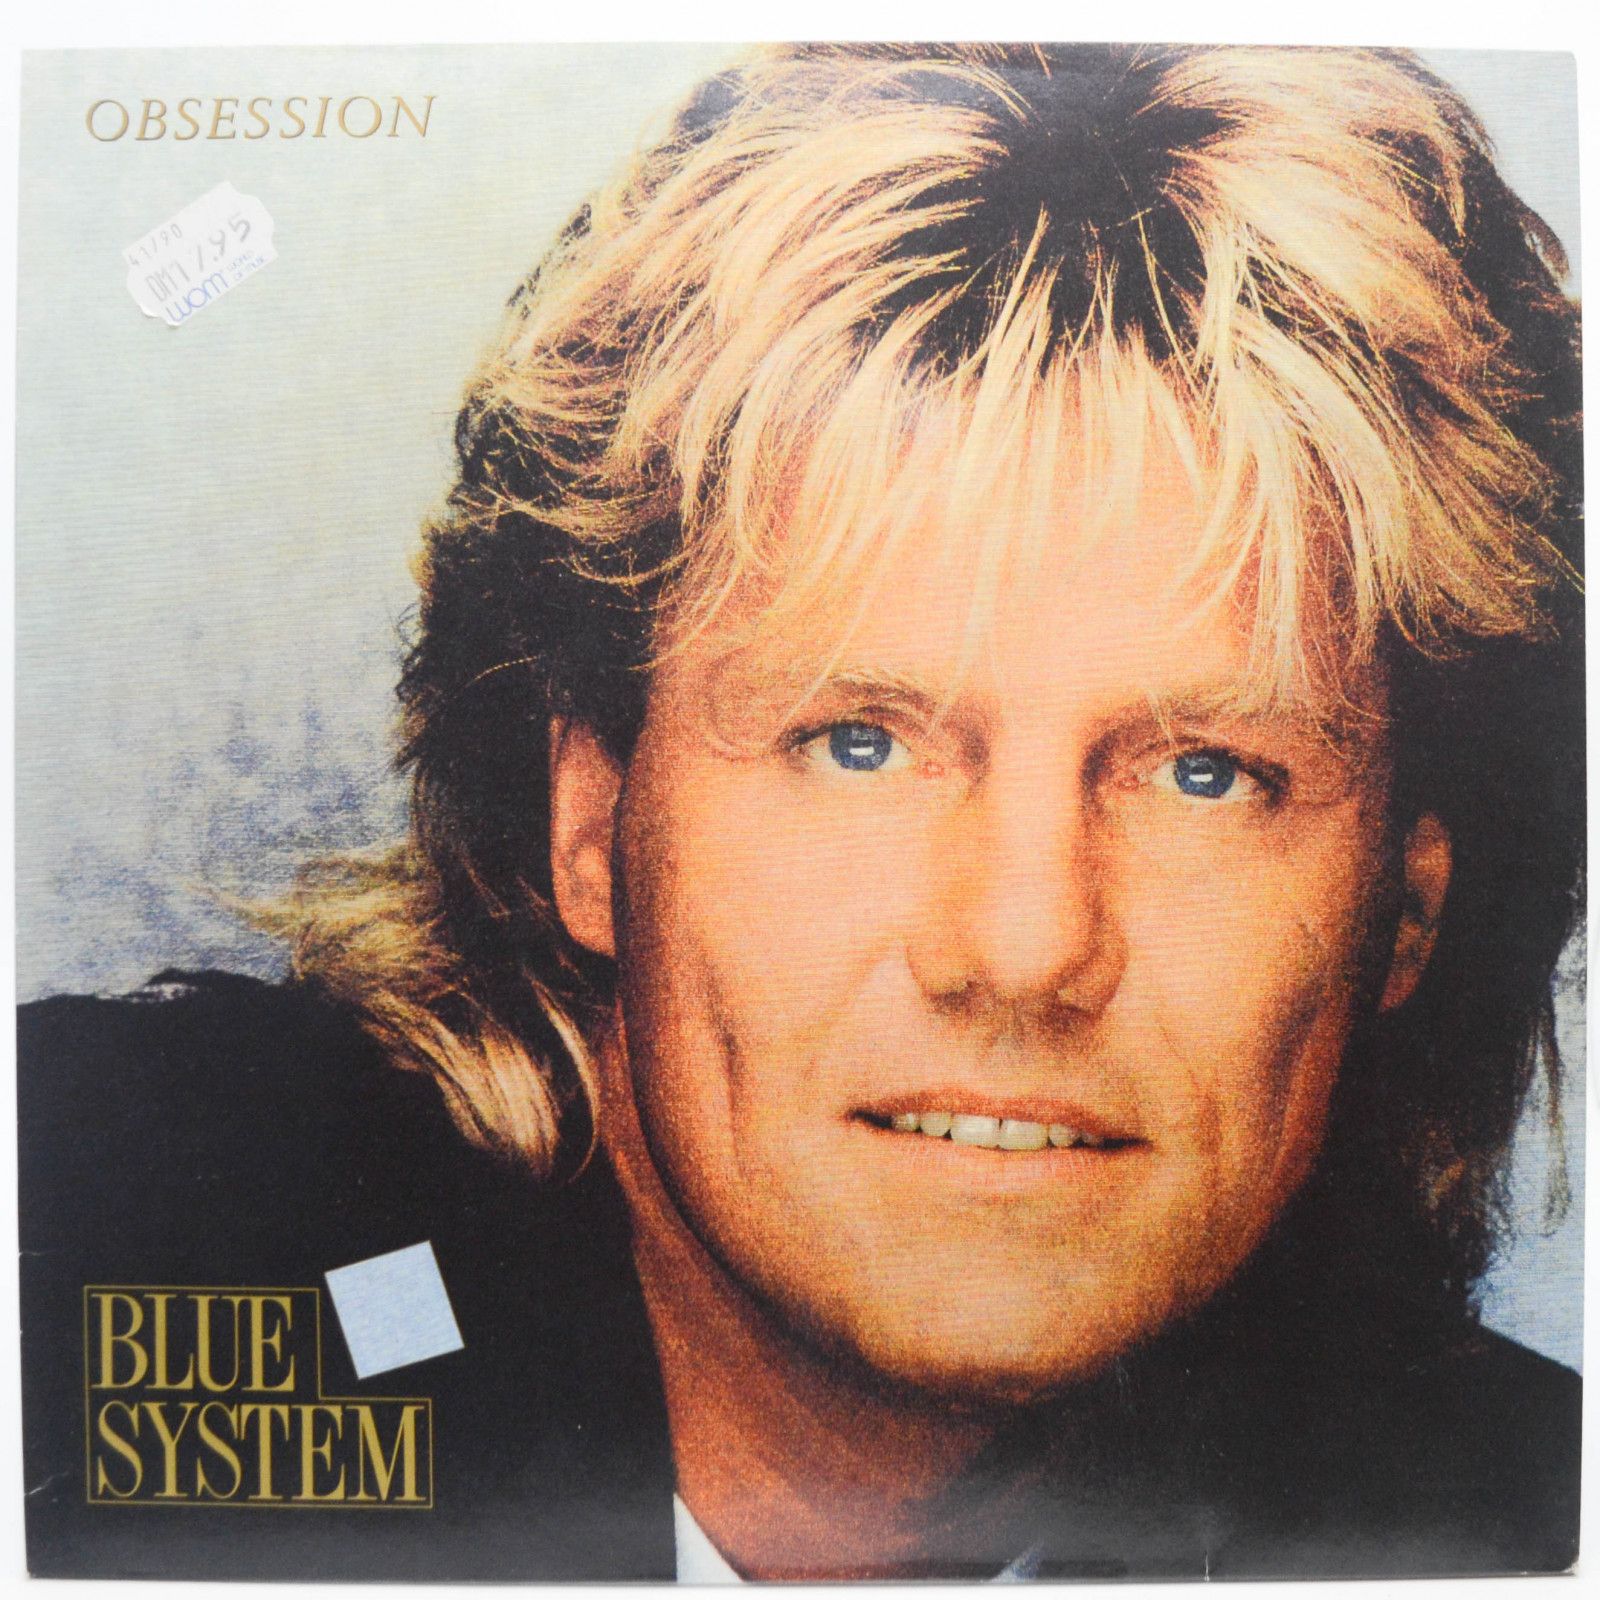 Blue System — Obsession, 1990